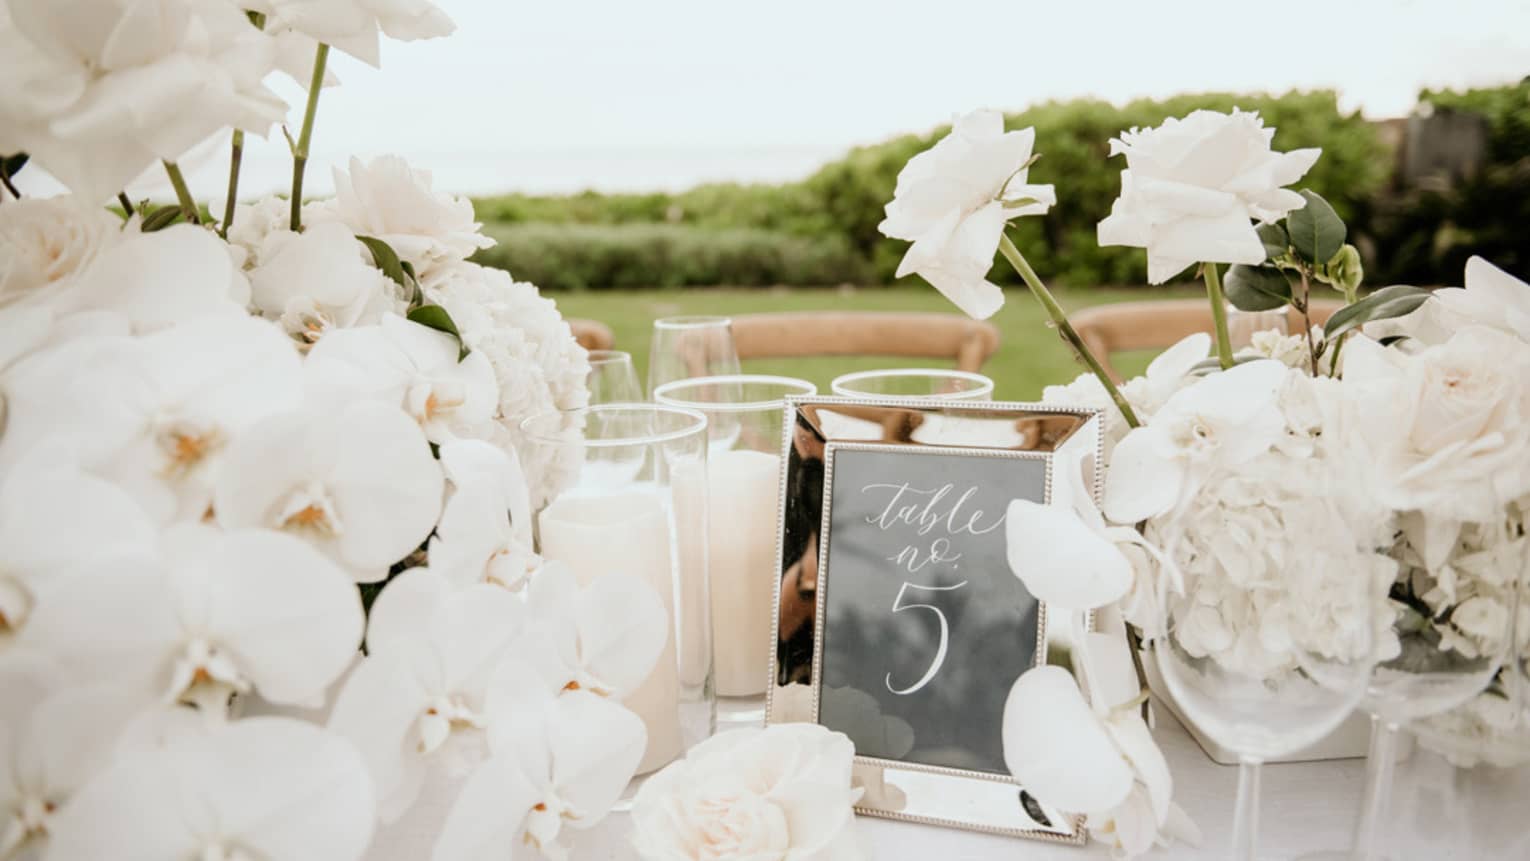 Wedding table setting with white orchid centrepieces